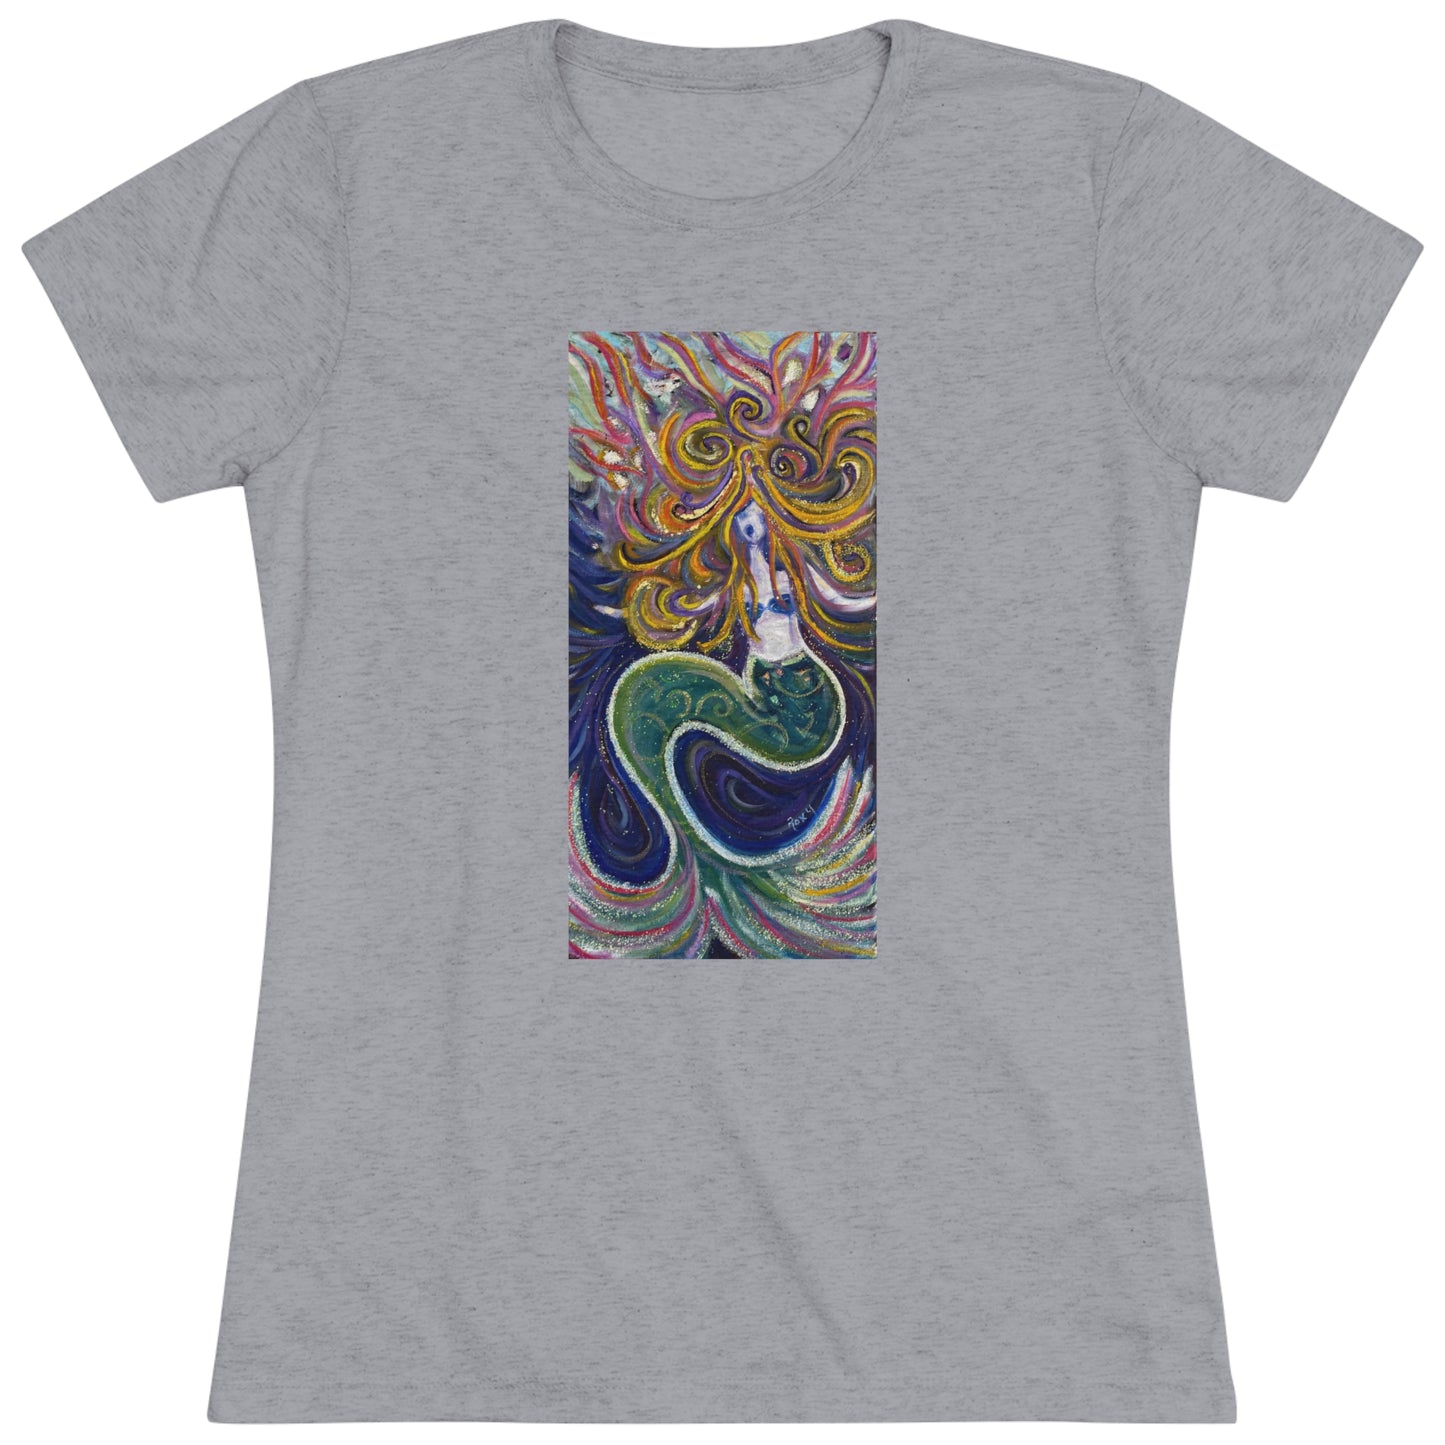 The Mermaid Women's fitted Triblend Tee  tee shirt